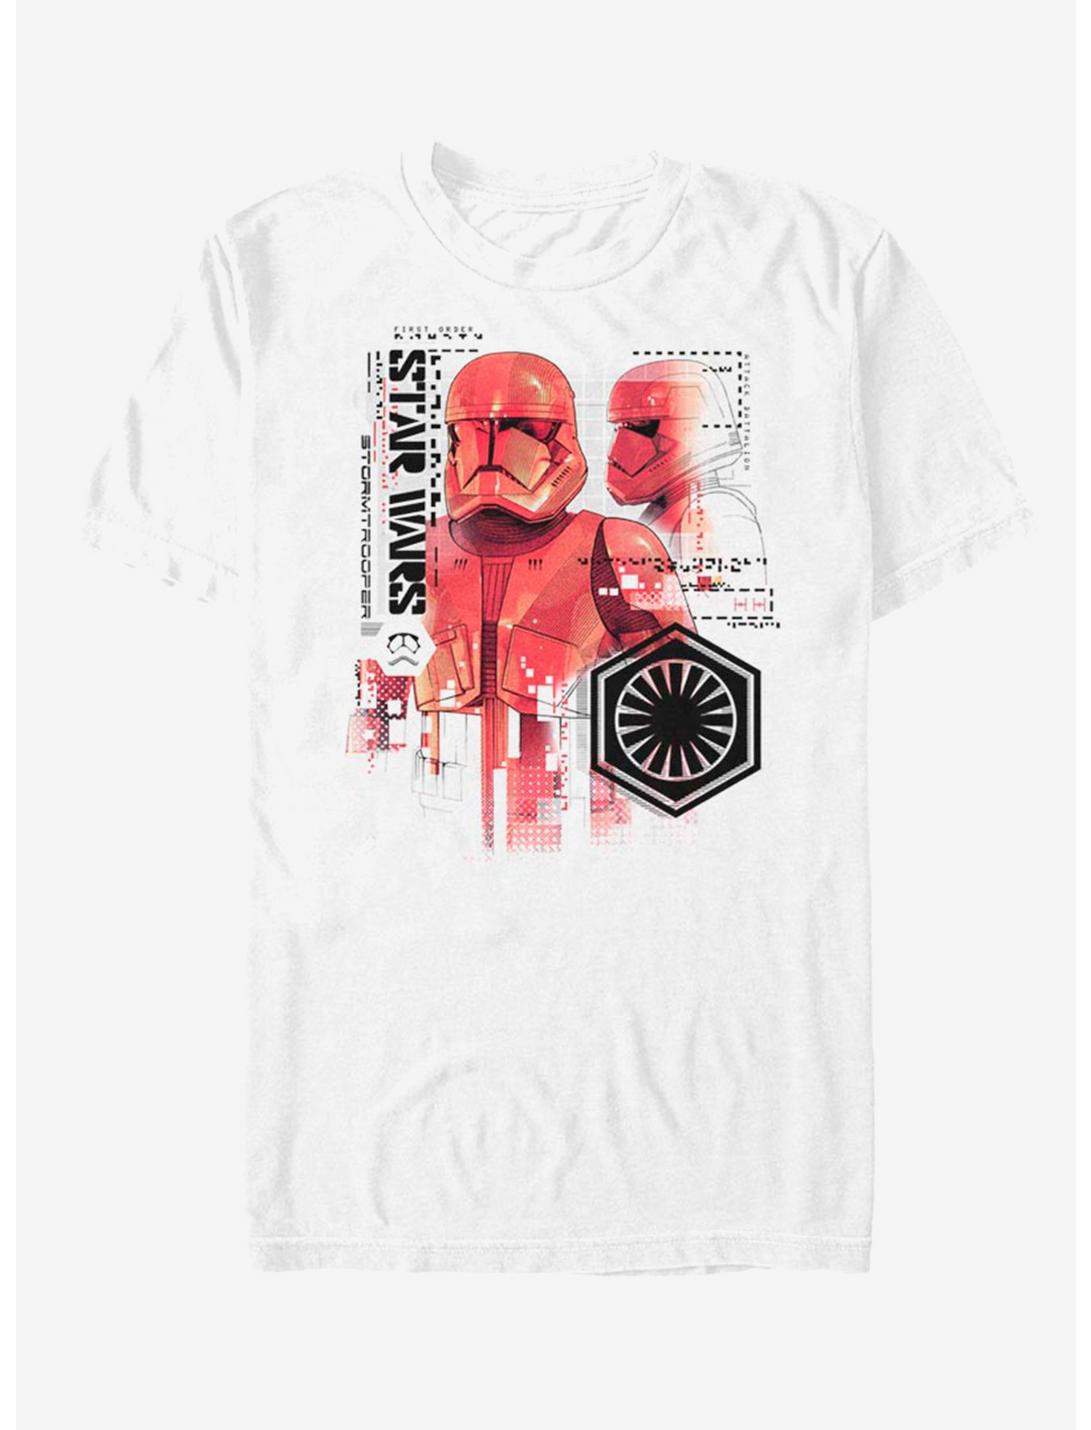 Star Wars Episode IX The Rise Of Skywalker Red Trooper Schematic T-Shirt, WHITE, hi-res